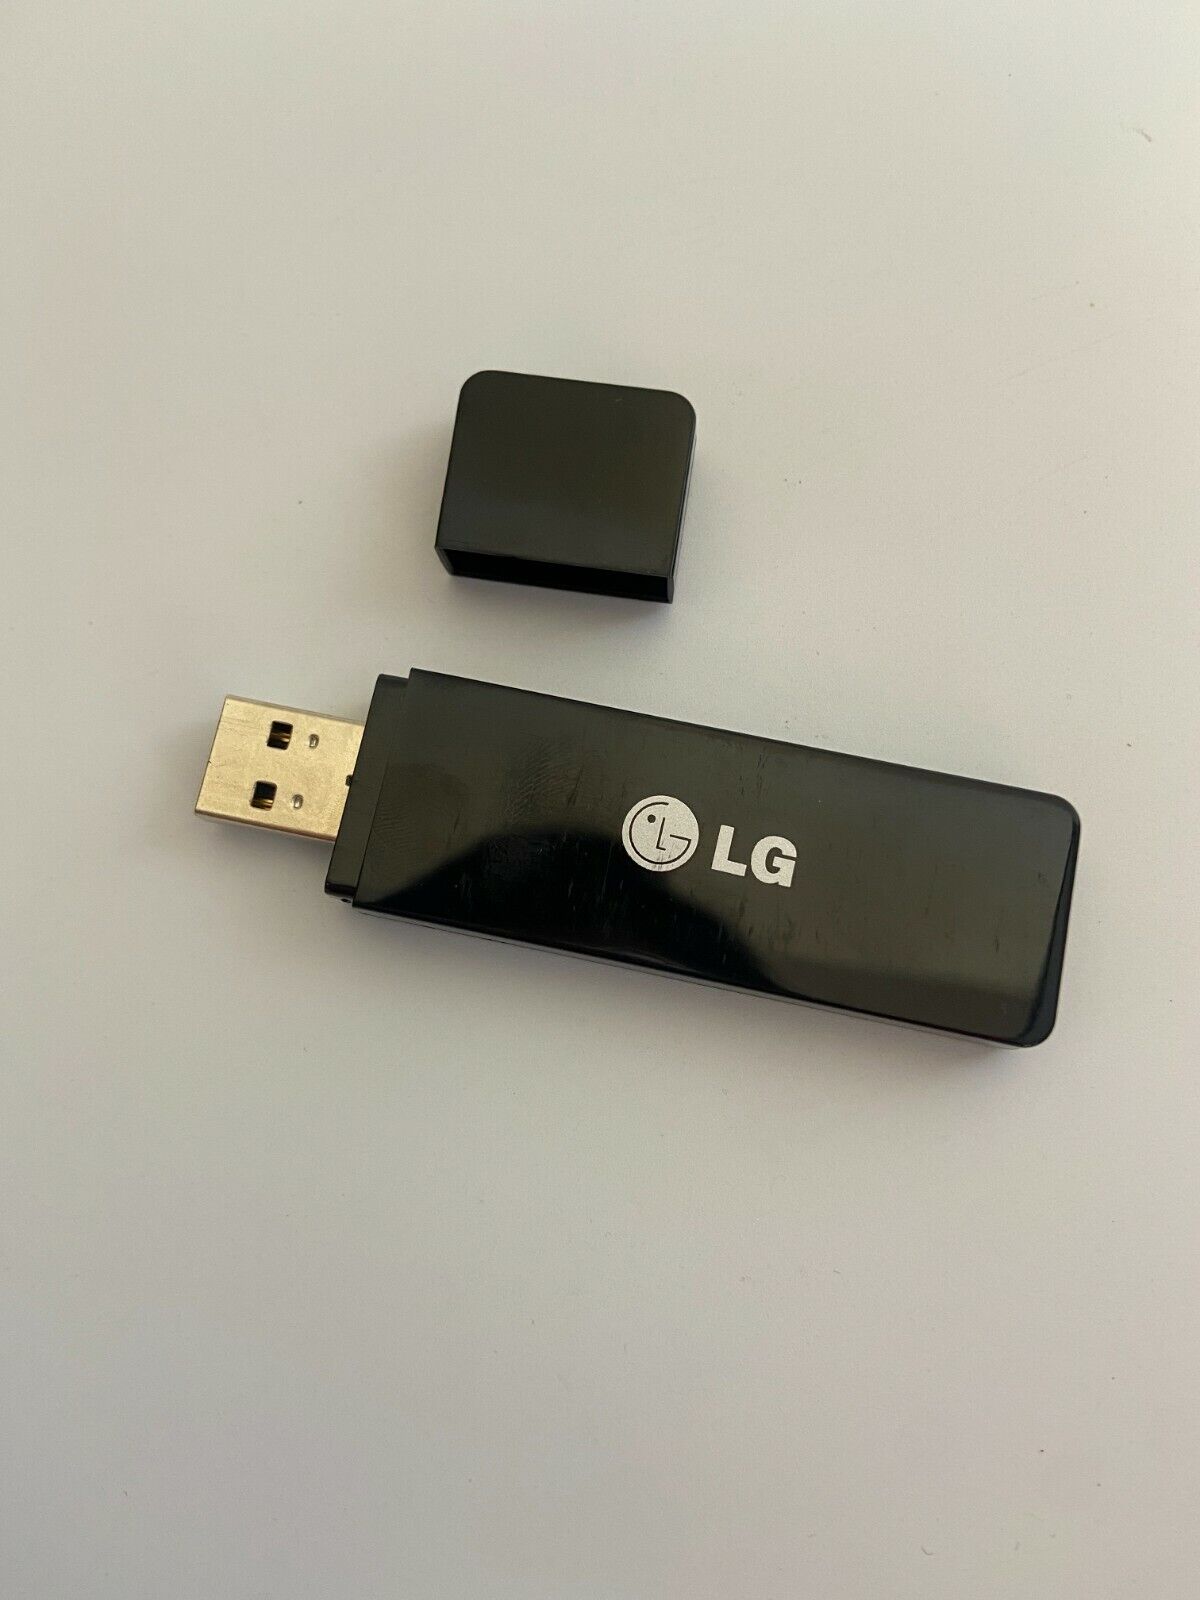 LG AN-WF100 Wireless Internet Onto your LG Smart TV - Dongle - Yellow